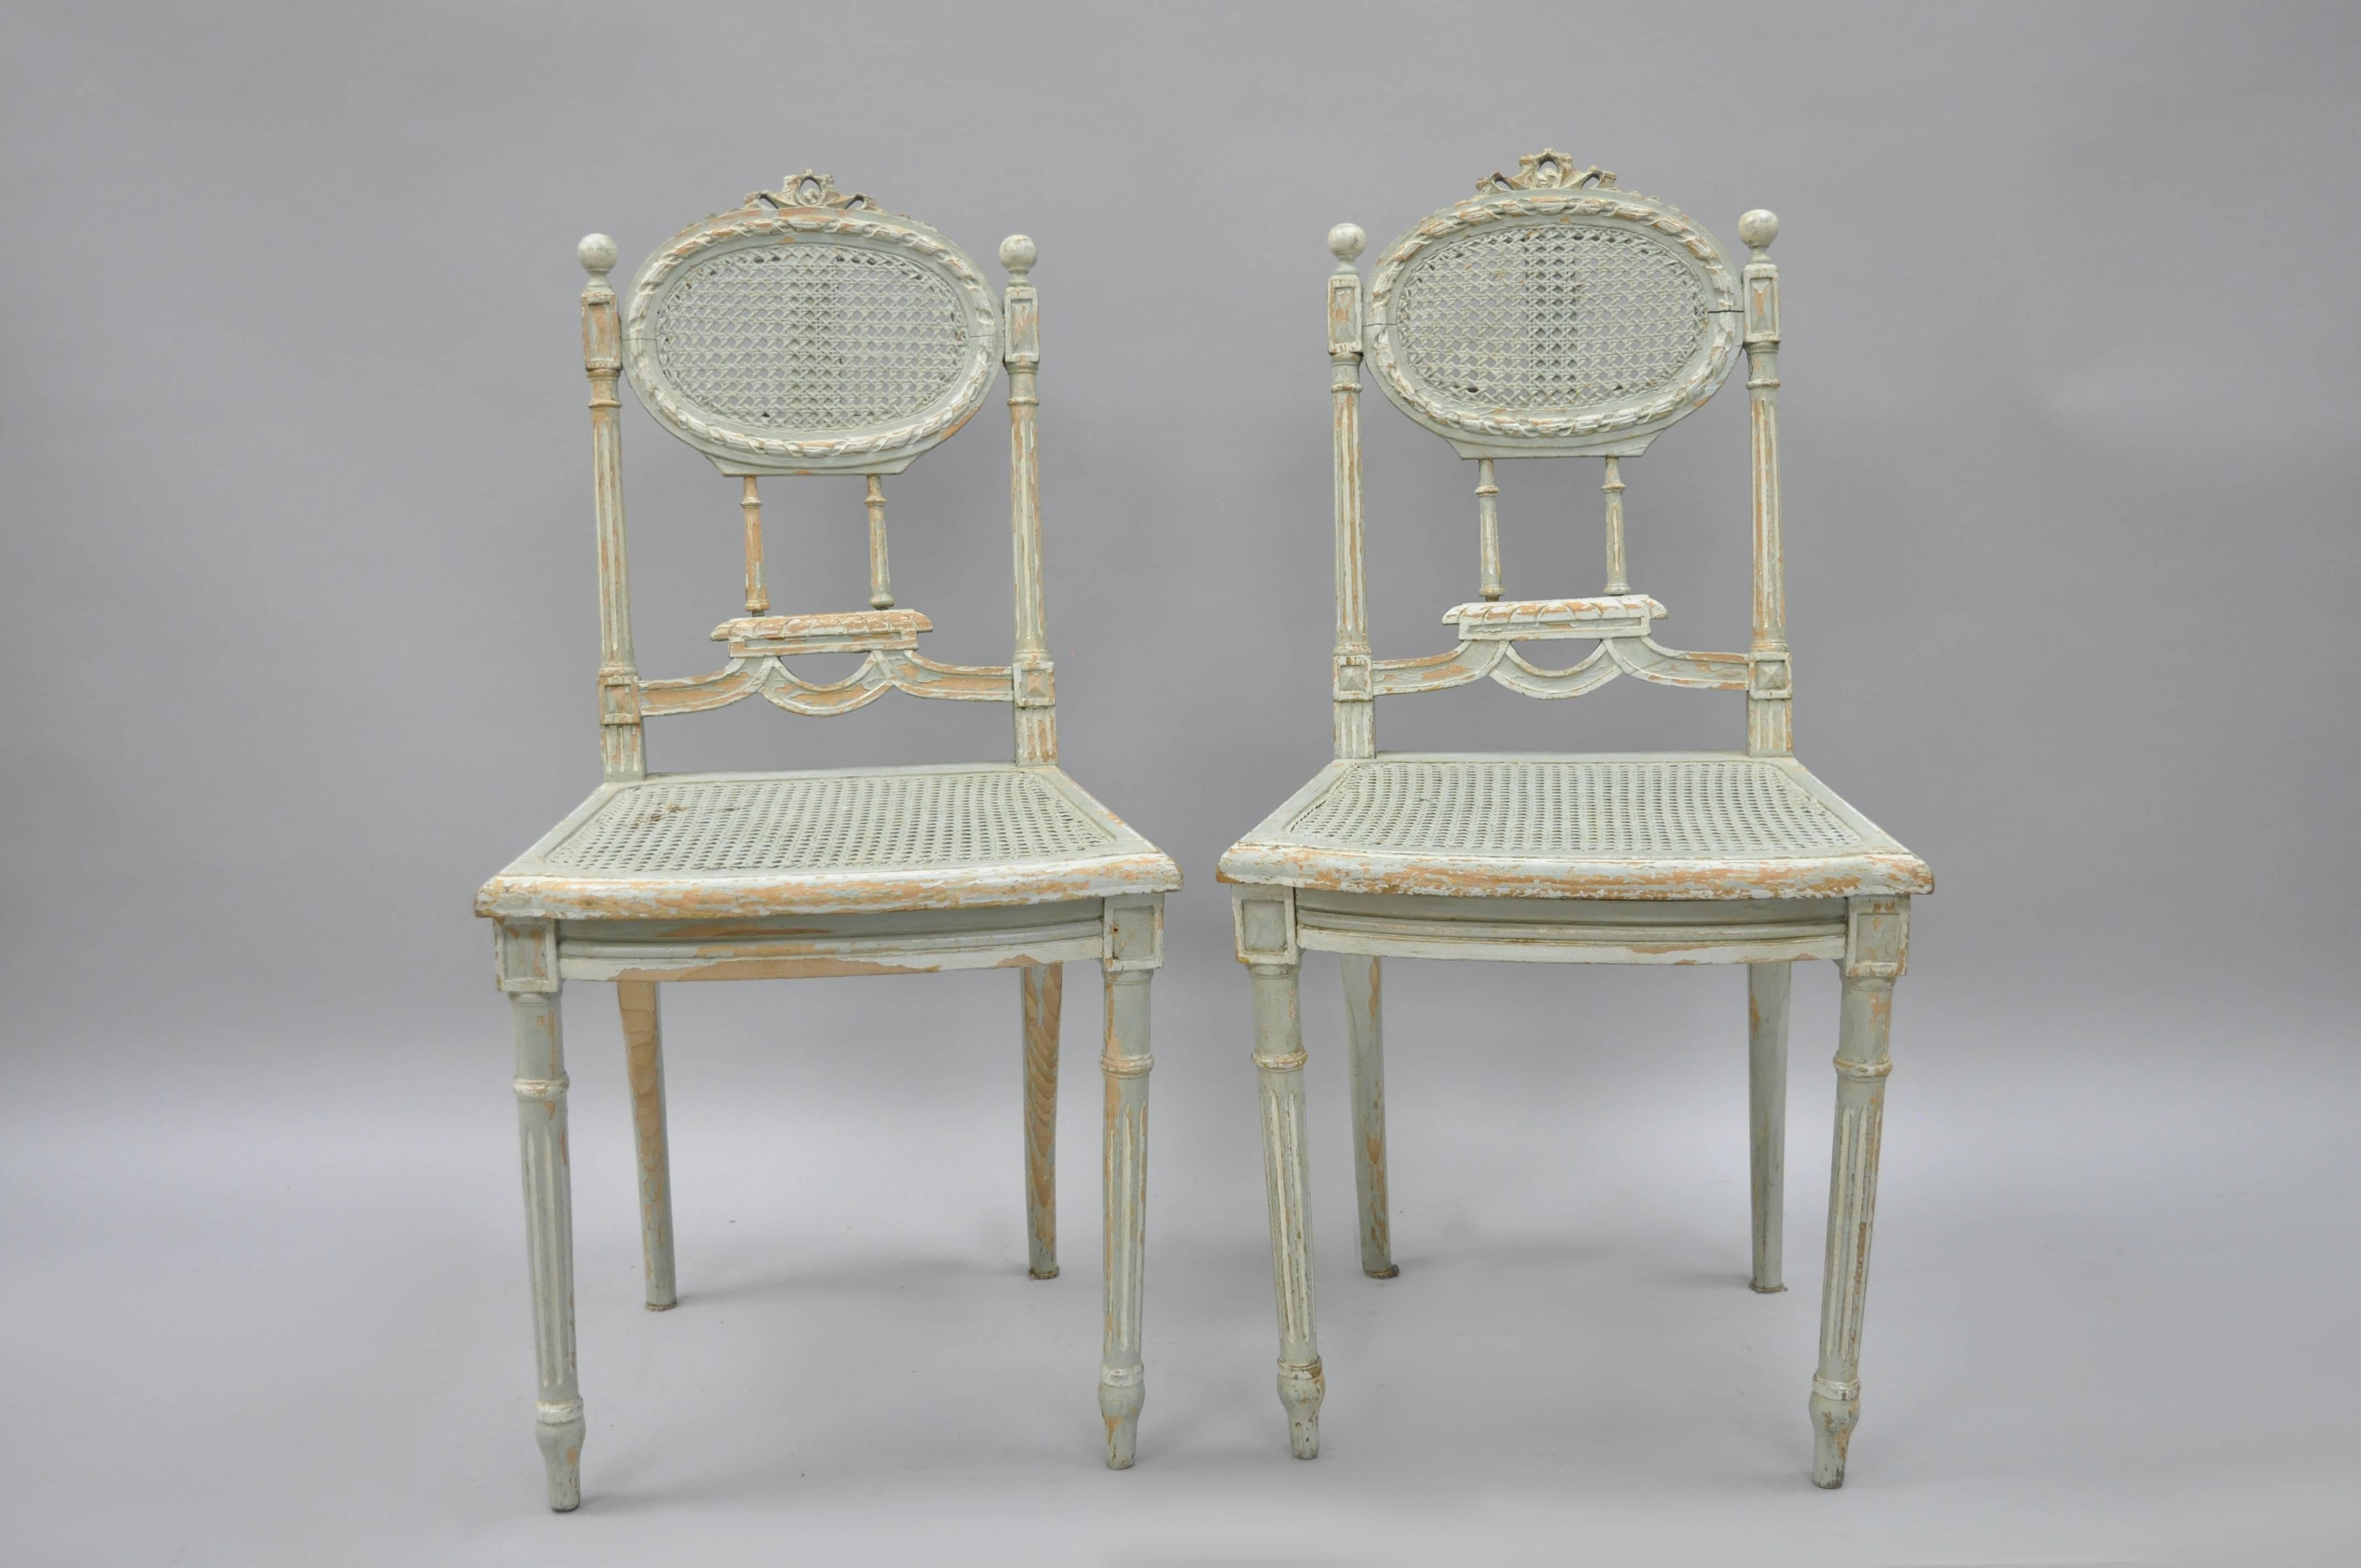 Pair of distress painted French Louis XVI style side chairs. Chairs are constructed of solid wood with reeded and tapered legs, carved bow tie crest and other classic French carvings throughout. Backs and seats are caned and the original painted